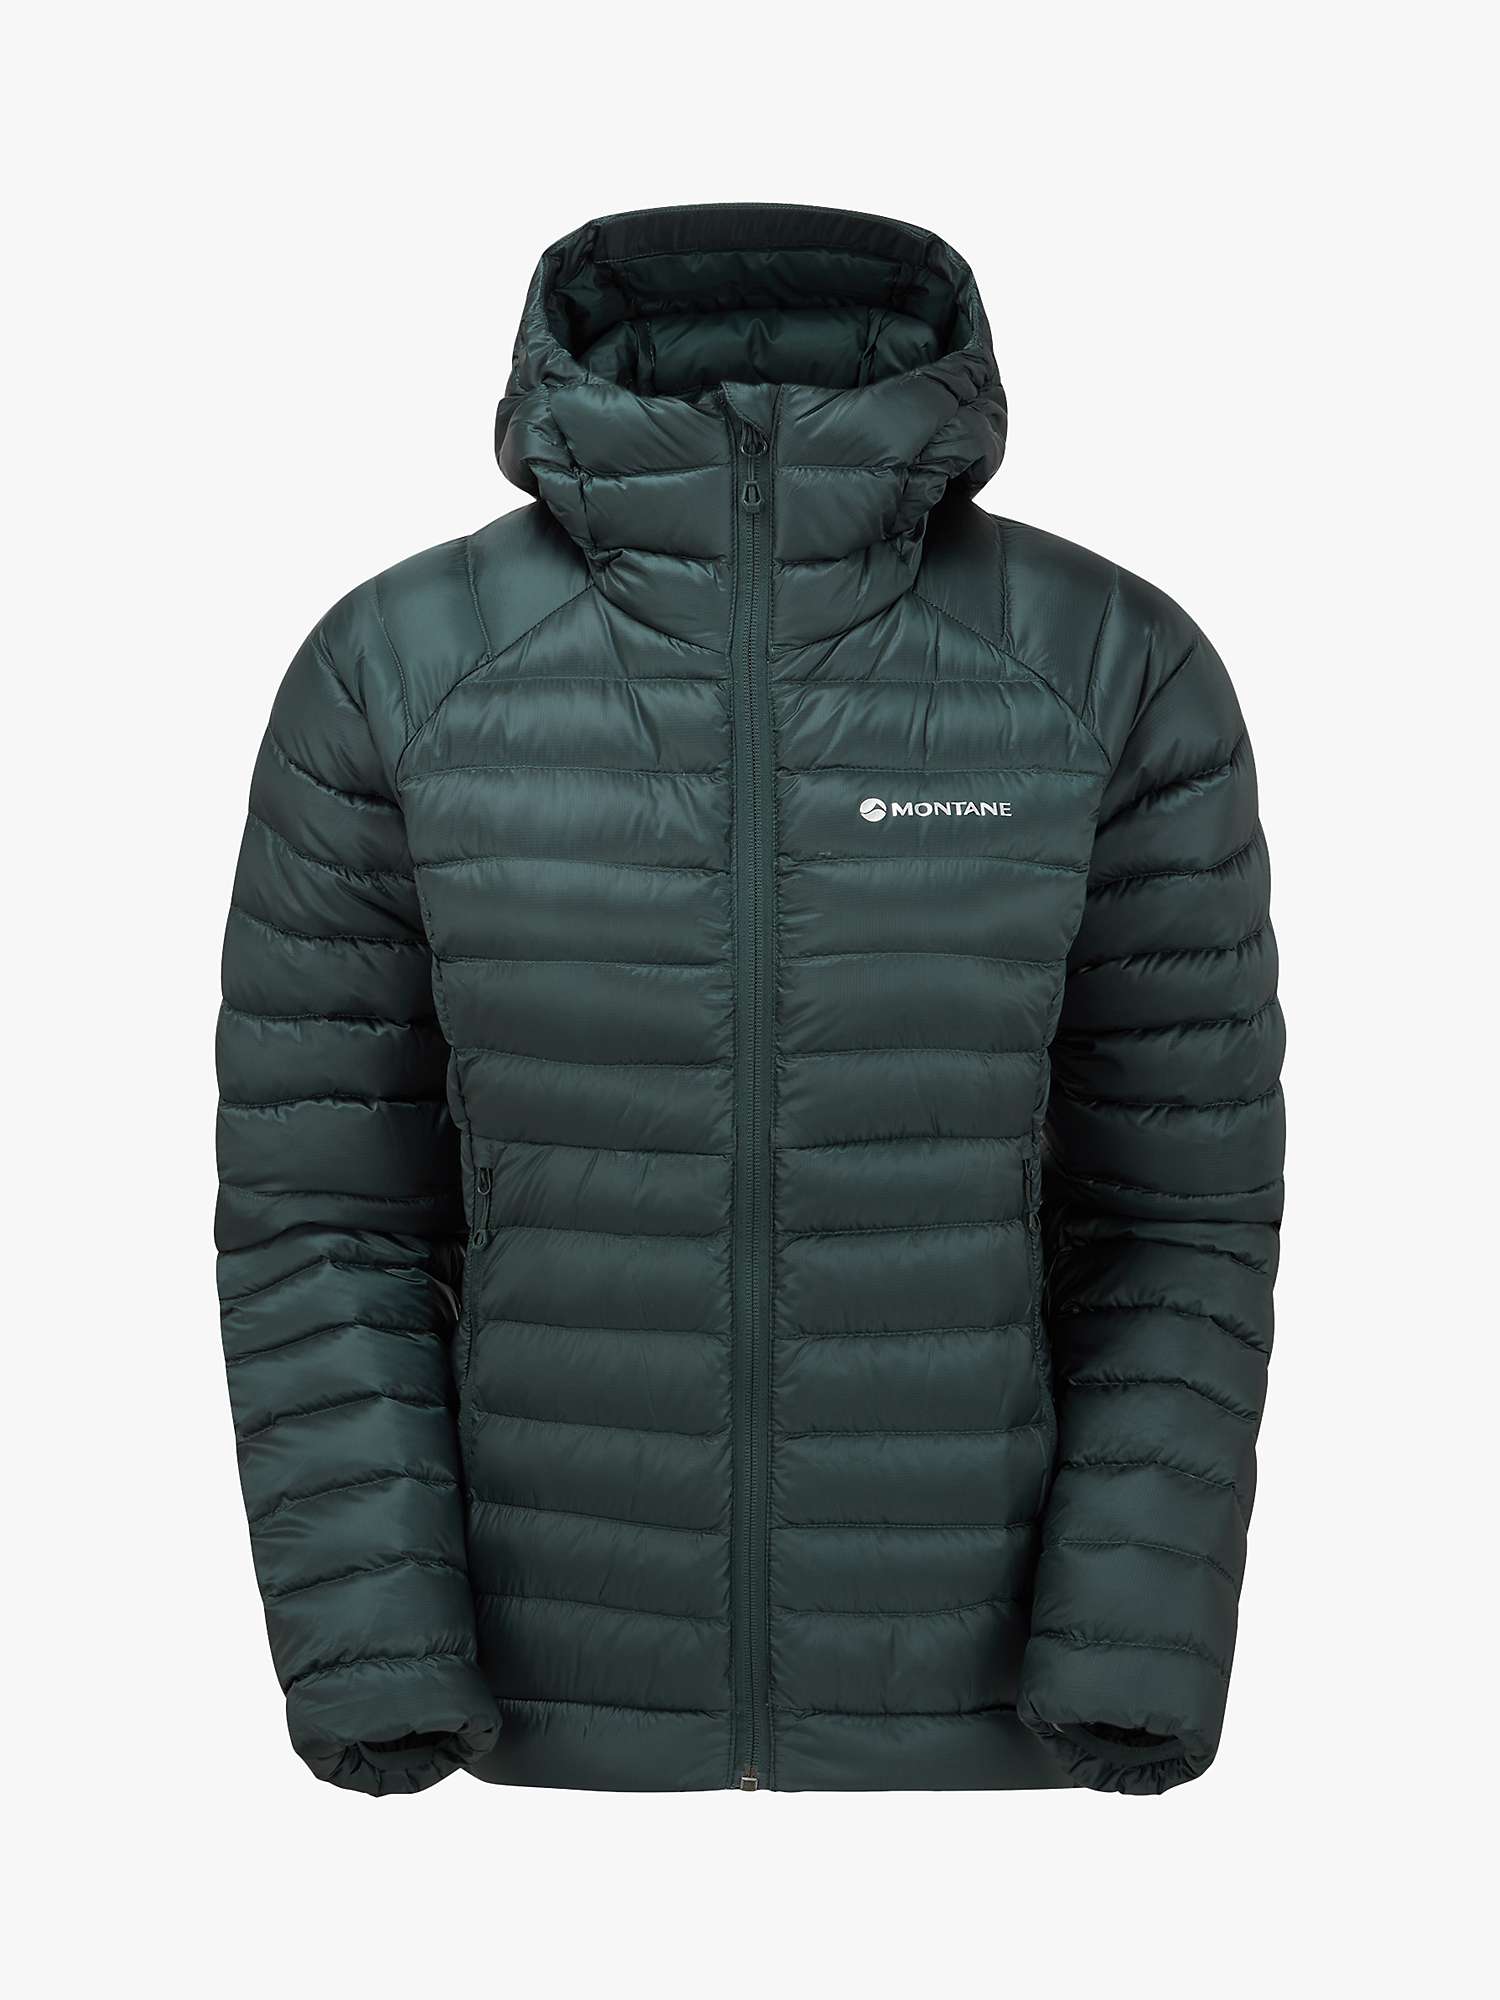 Buy Montane Anti-Freeze Women's Recycled Packable Down Jacket Online at johnlewis.com